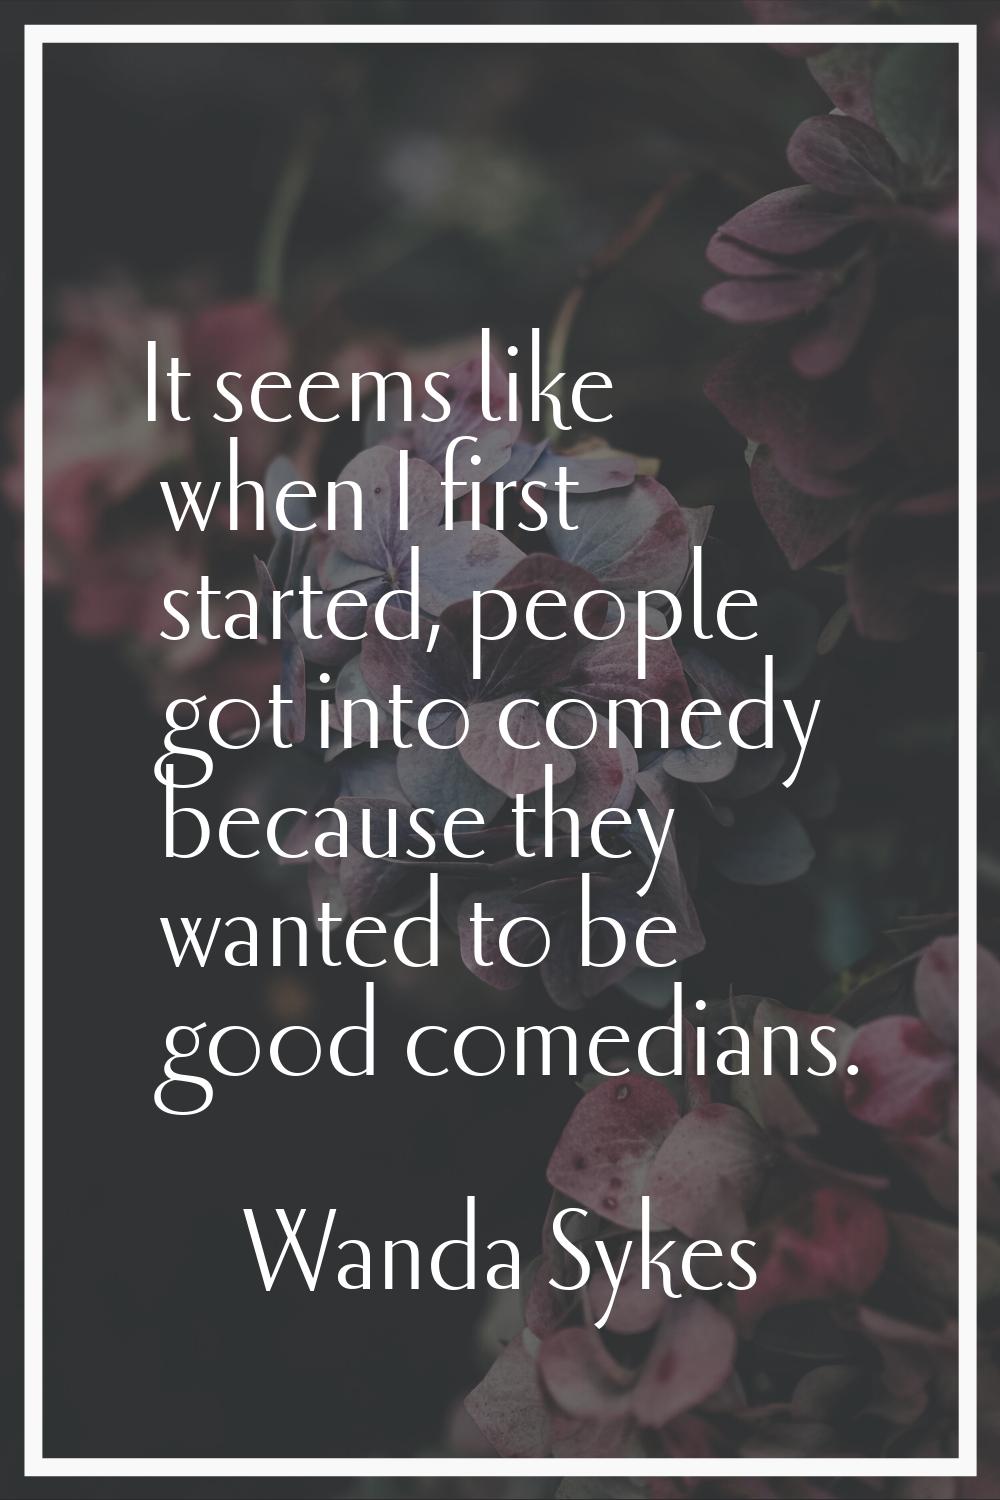 It seems like when I first started, people got into comedy because they wanted to be good comedians